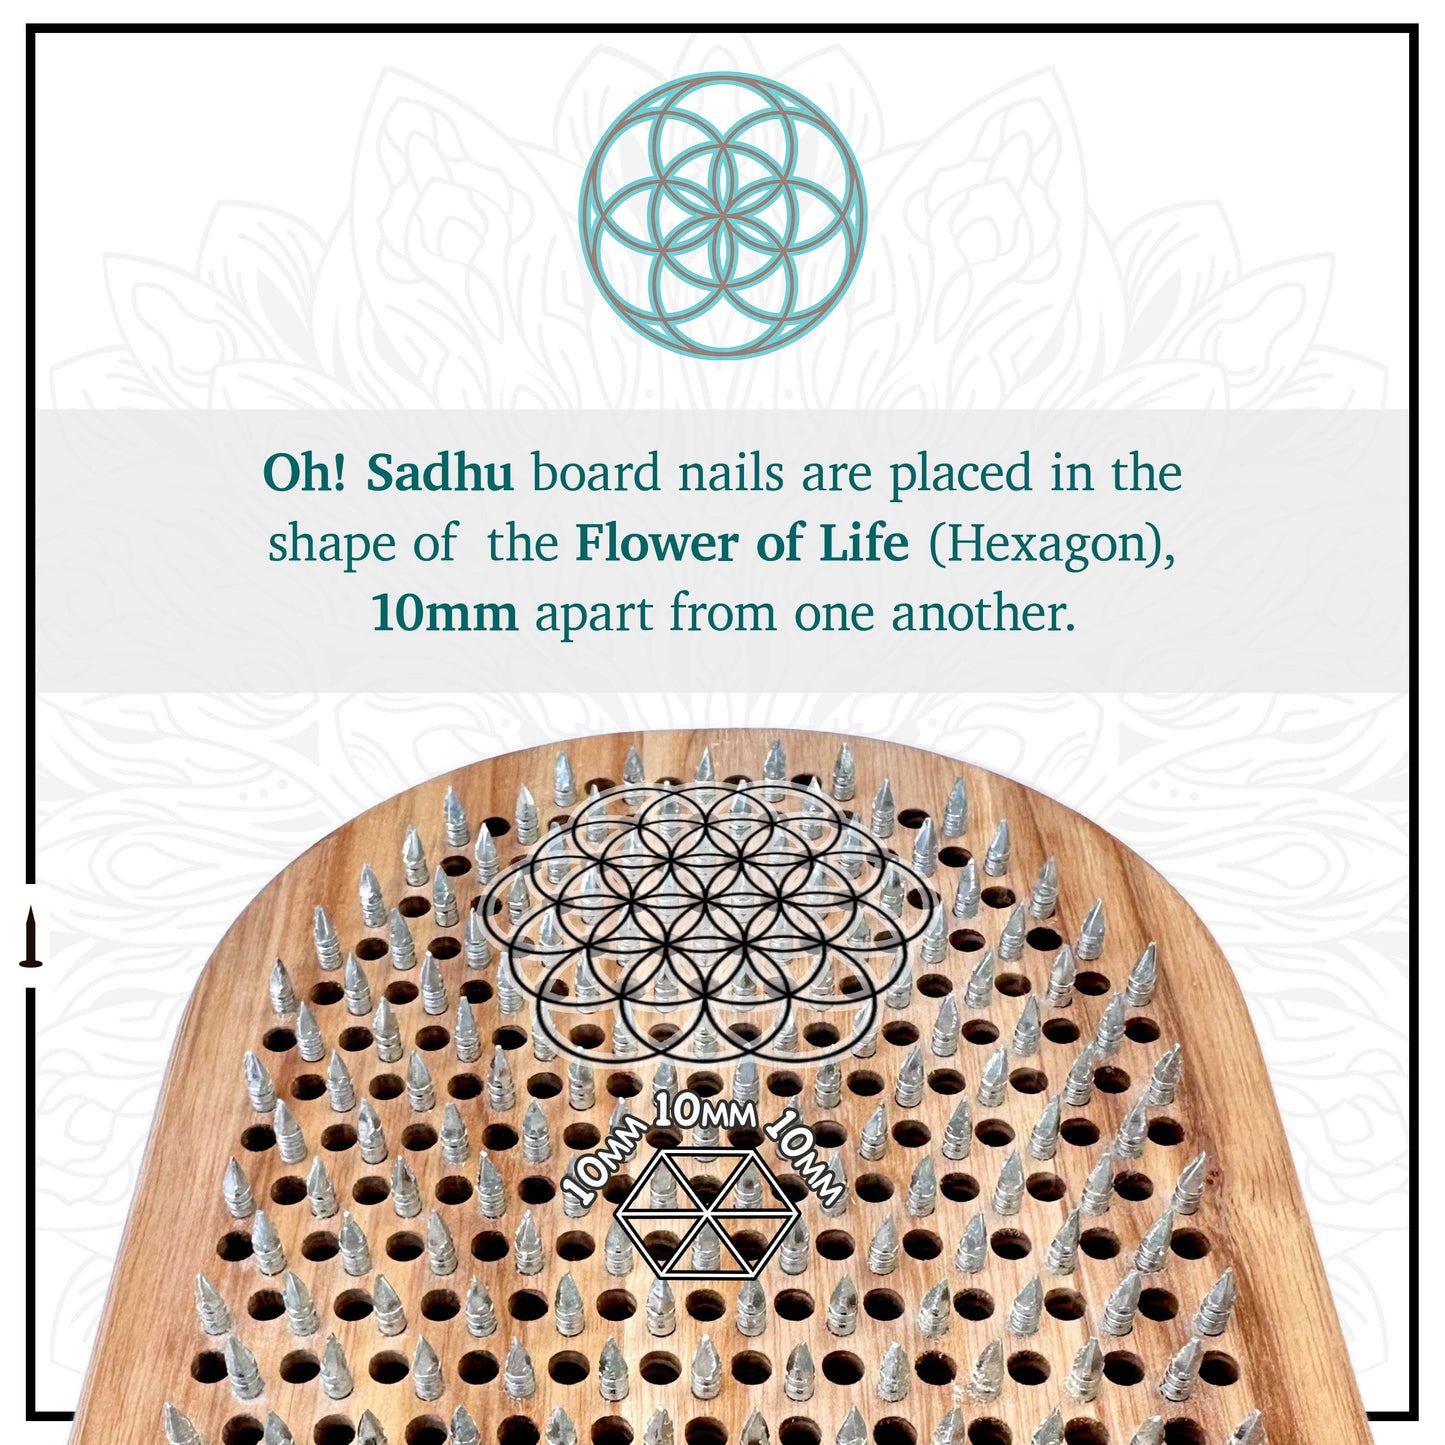 Nails arrangement of sadhu board in the shape of flower of life and equal 10mm